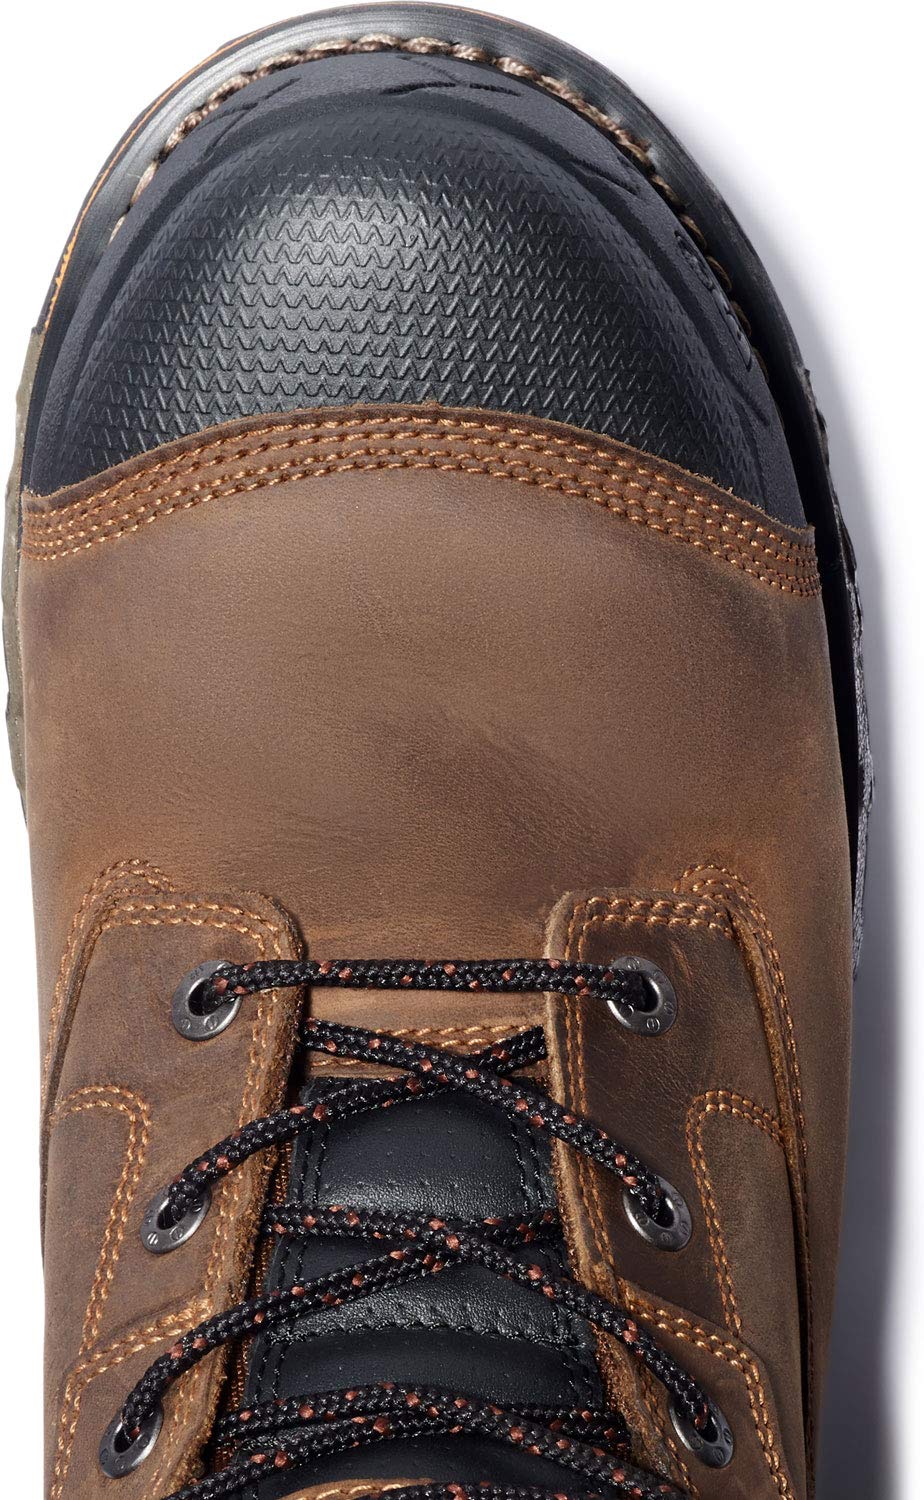 Timberland PRO Men's Boondock 6 Inch Composite Safety Toe Waterproof 6 CT WP, Brown, 12 Wide